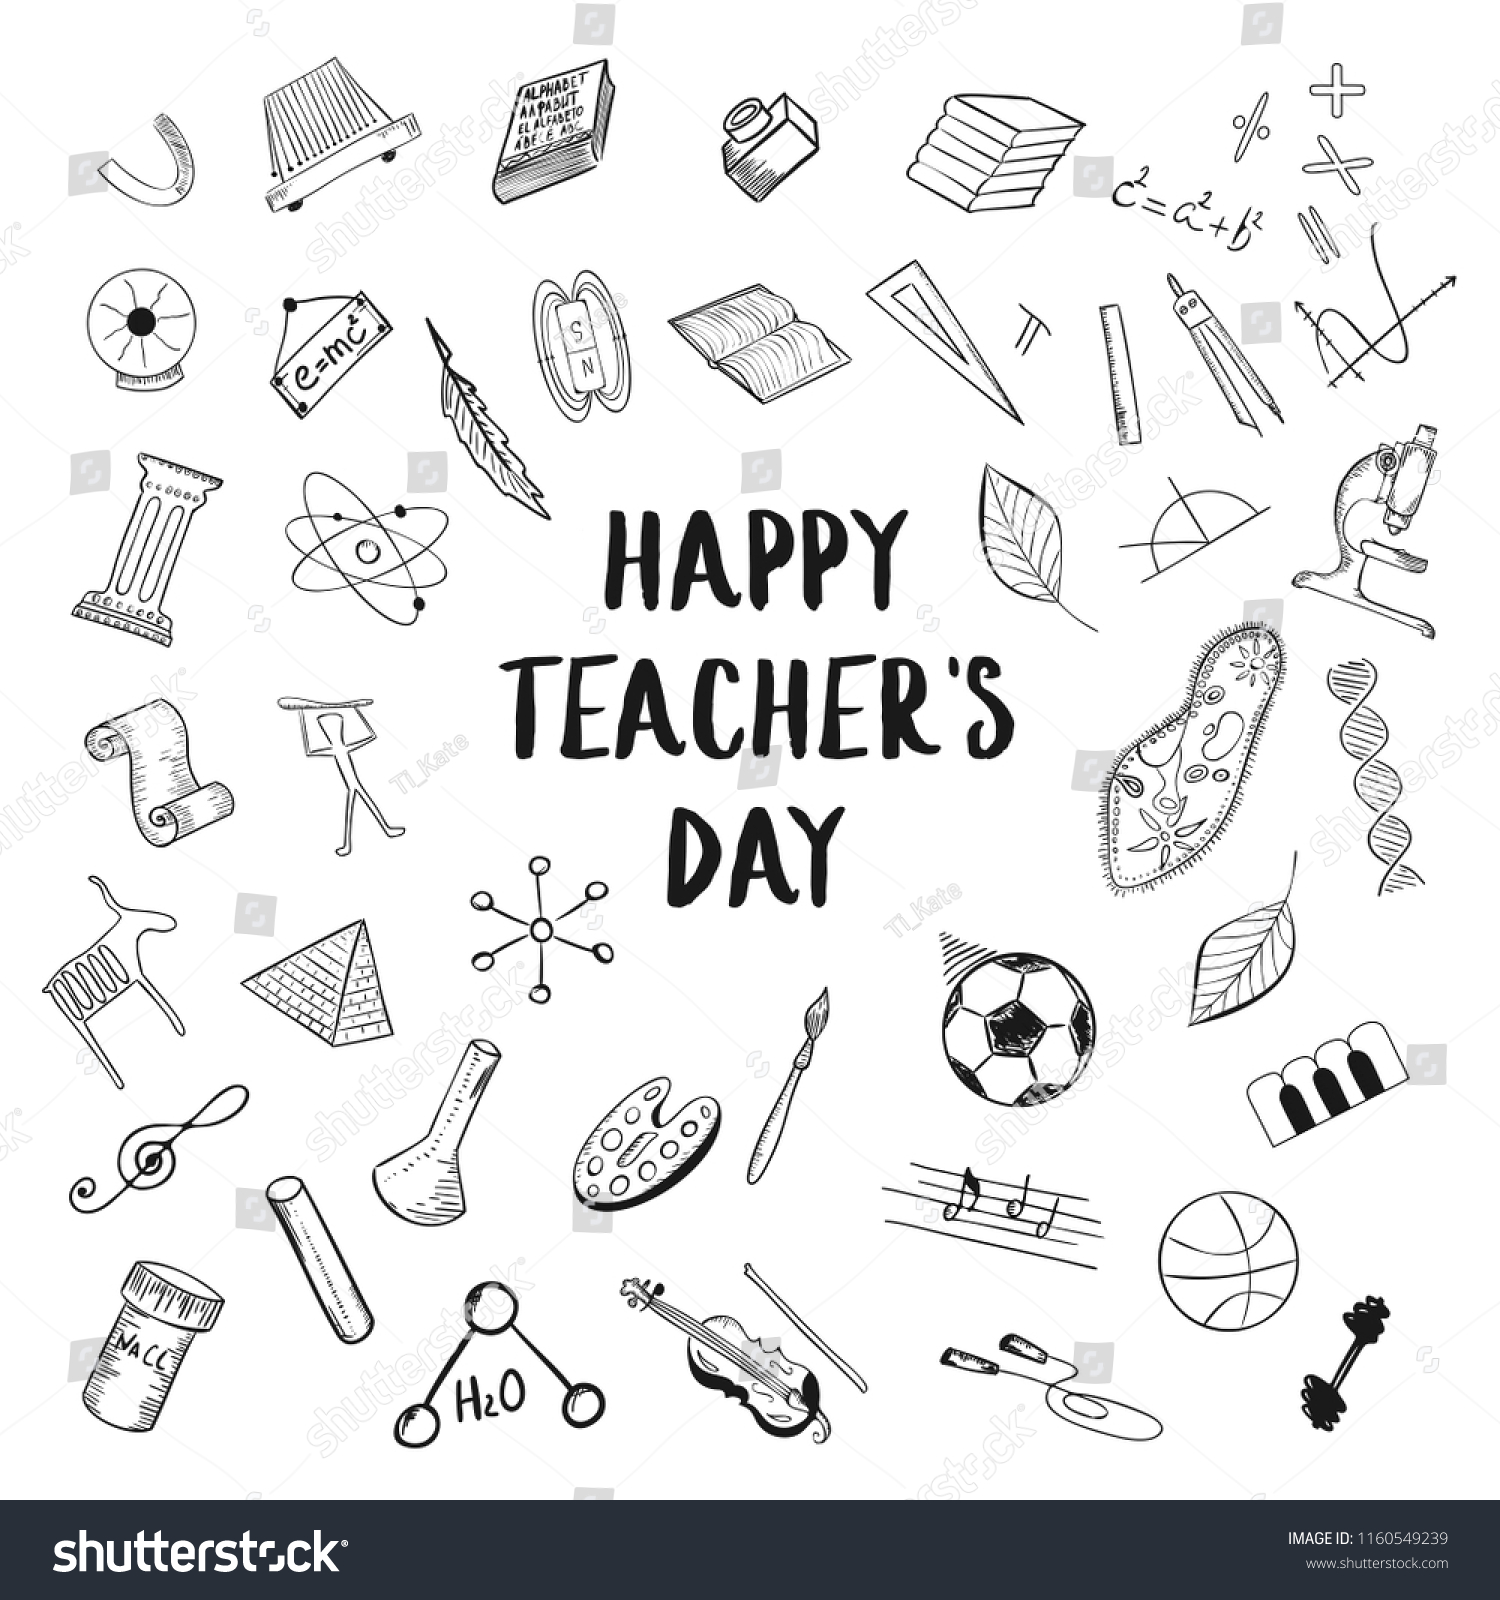 Happy Teachers Day Greeting On White Stock Vector (Royalty Free ...